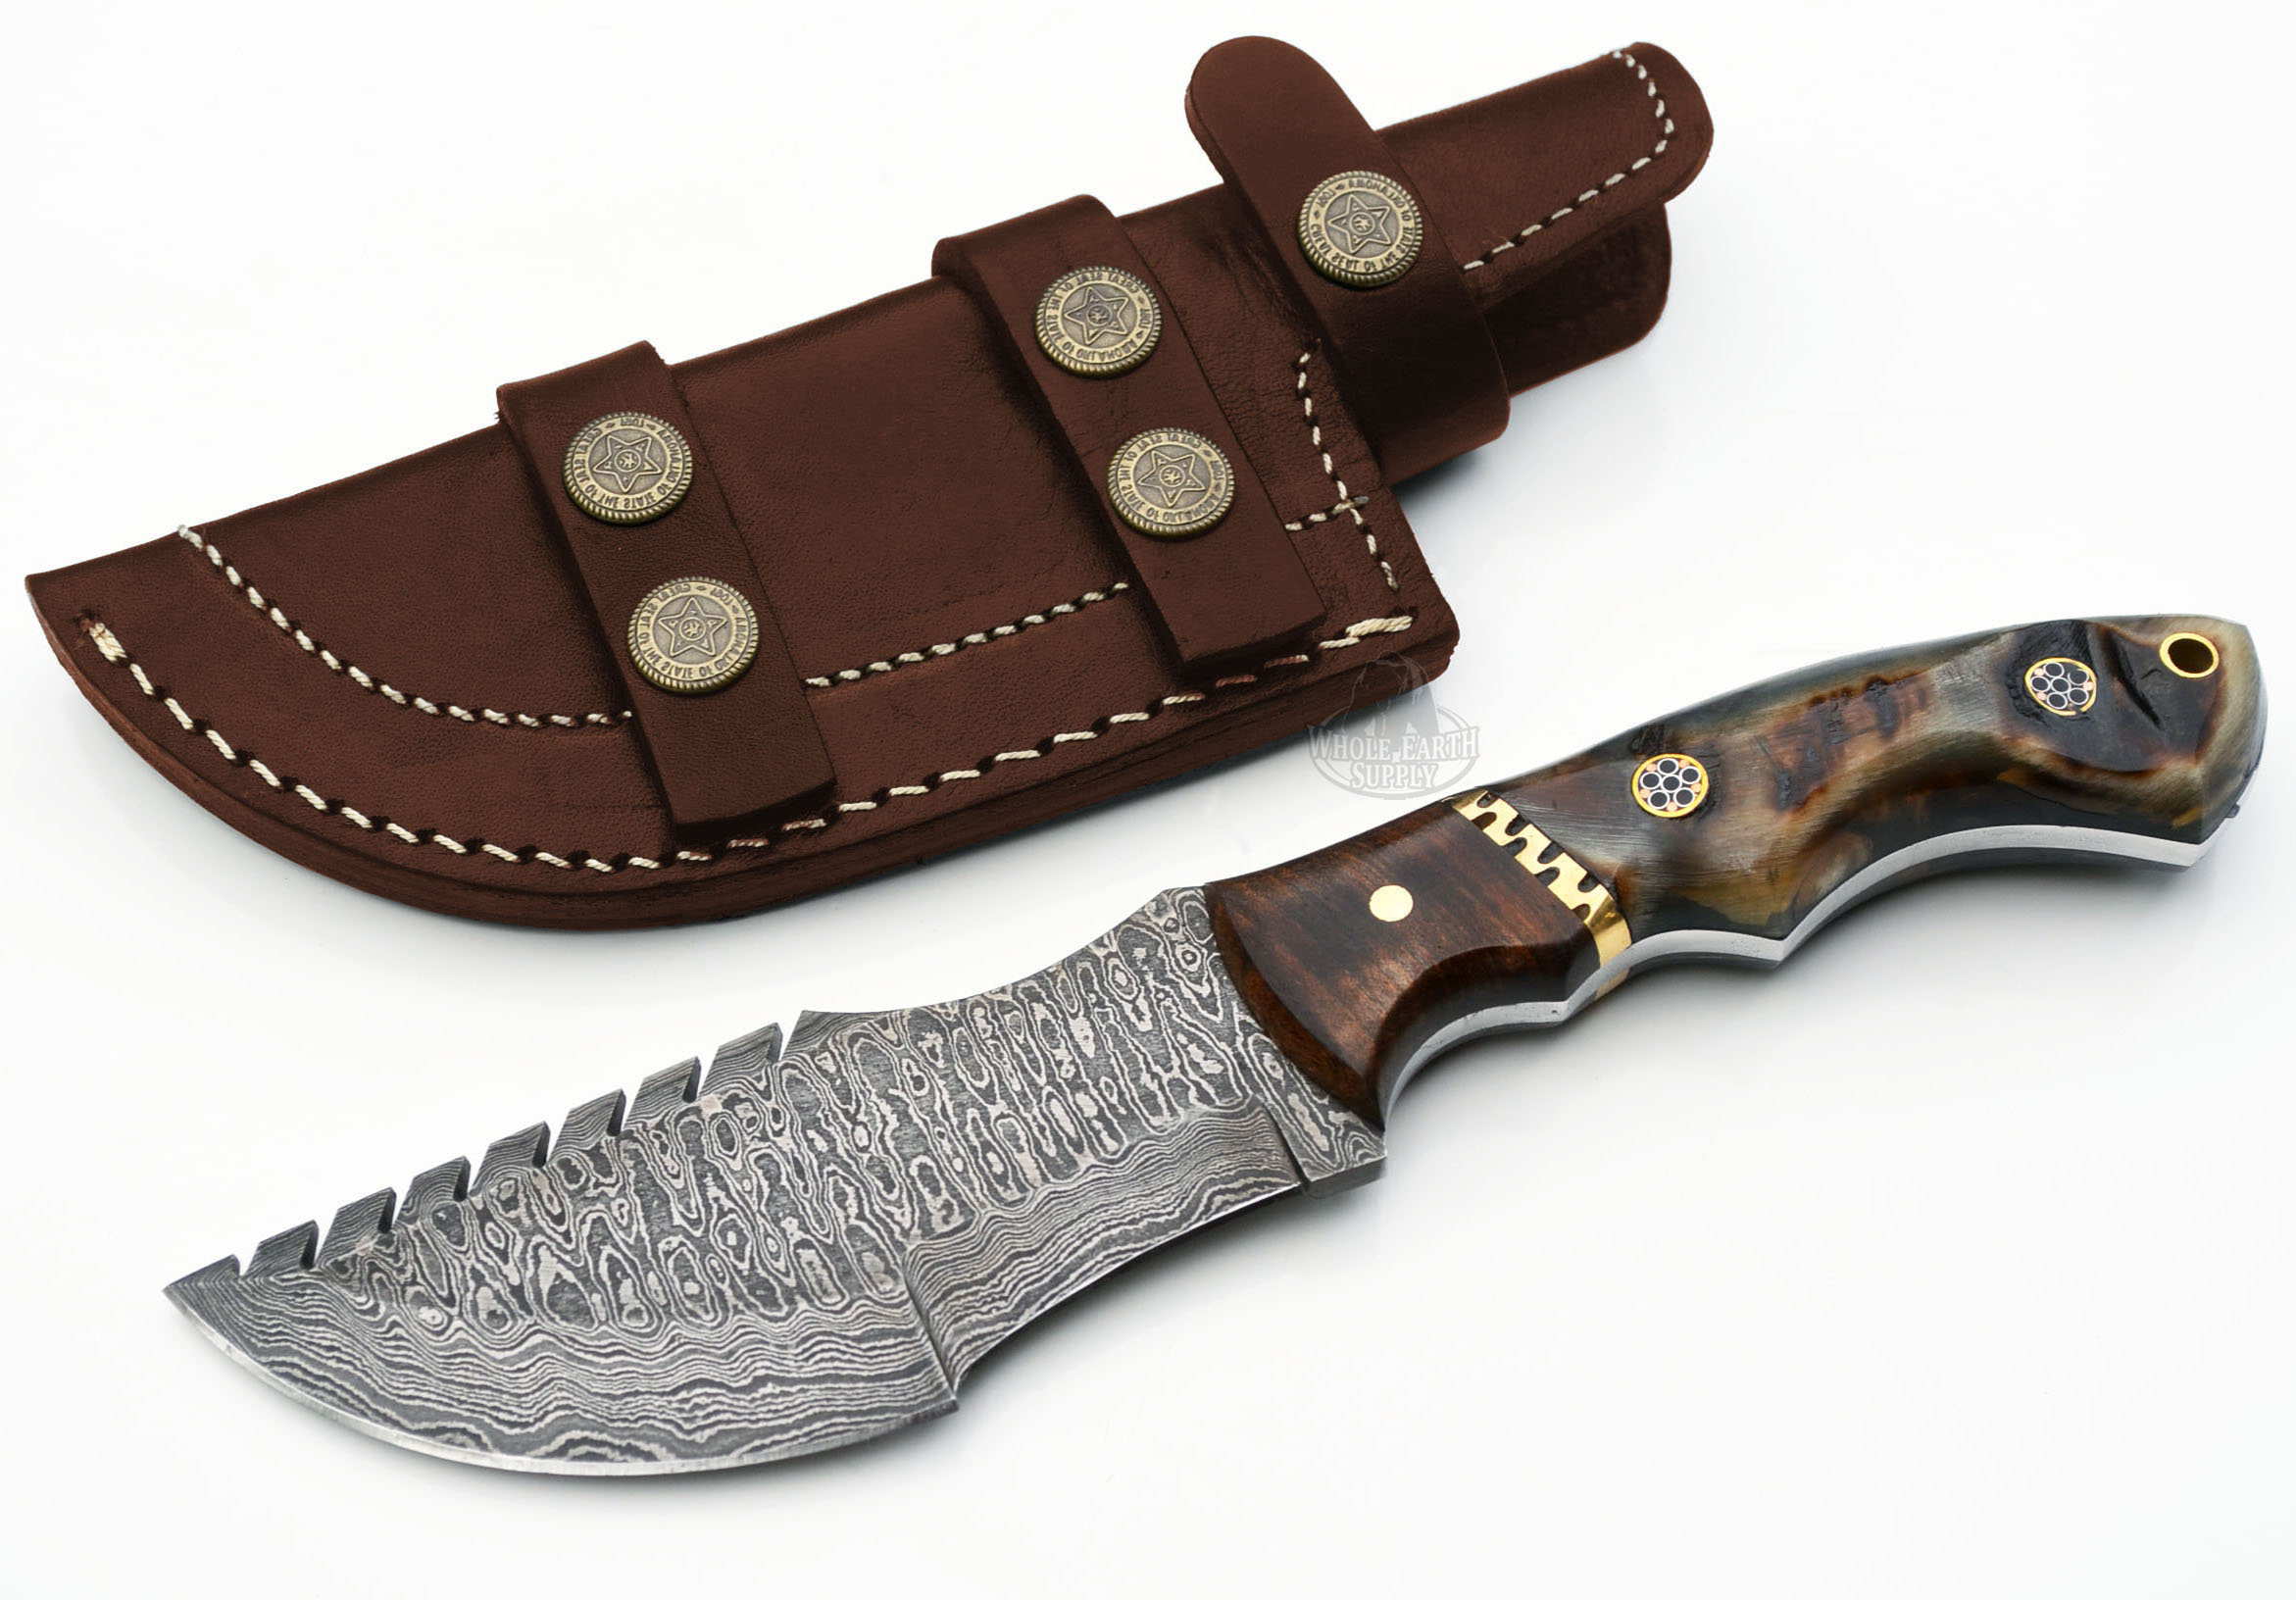 Ladder Damascus Tracker Knife Hunting Knives Ram Horn Handle with Wood Inlay Blank +Sheath